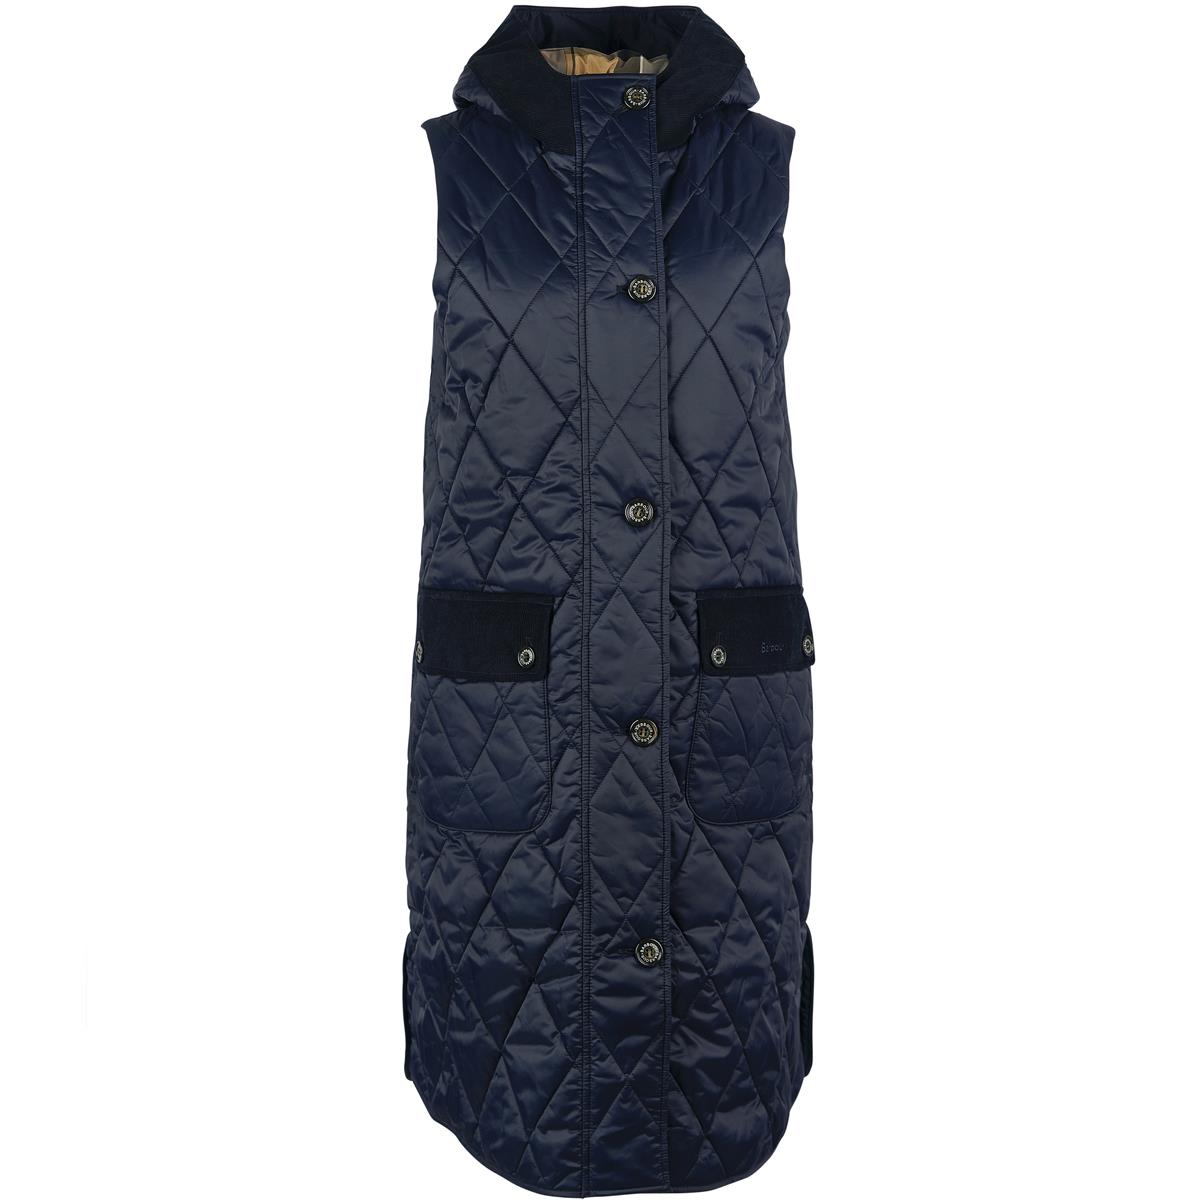 Does the Barbour Womens Mickley Gilet feature both a front zip and buttons?